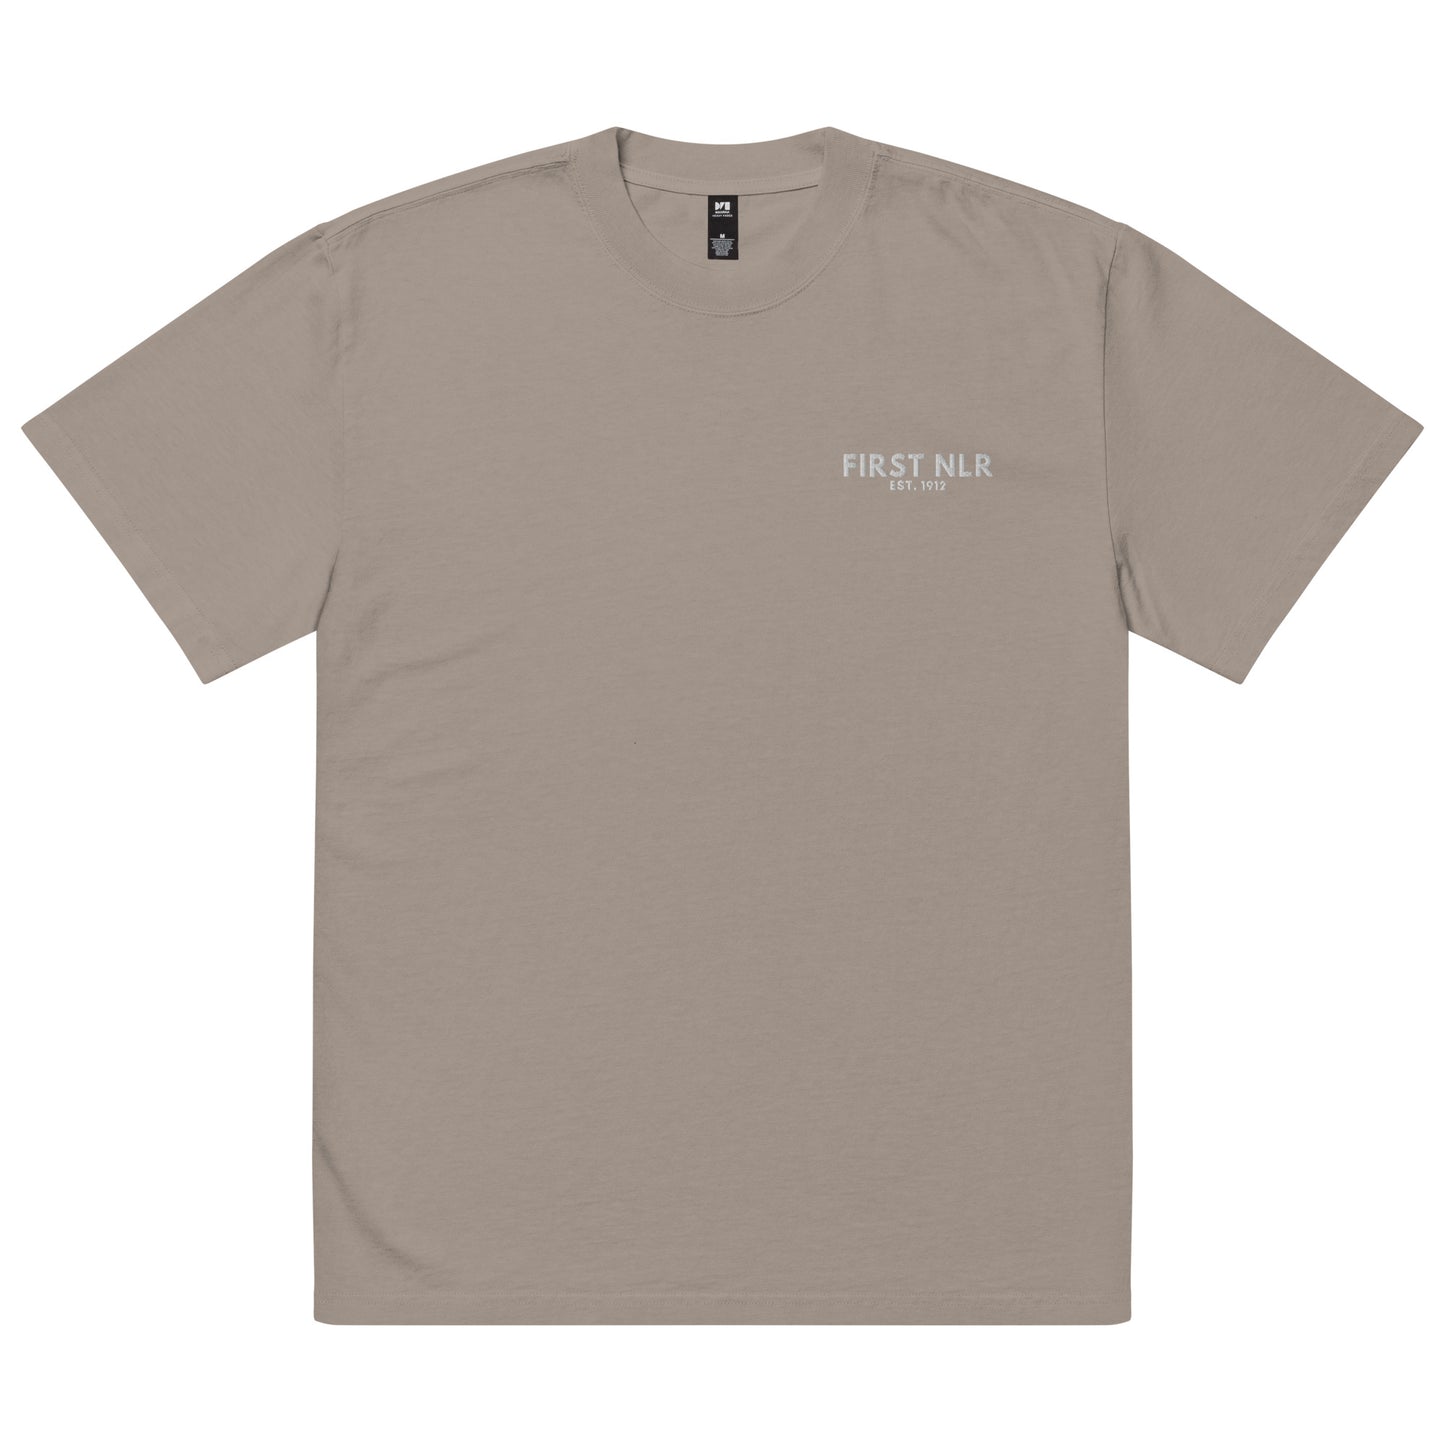 First NLR Pocket Embroidered (White) Oversized faded t-shirt